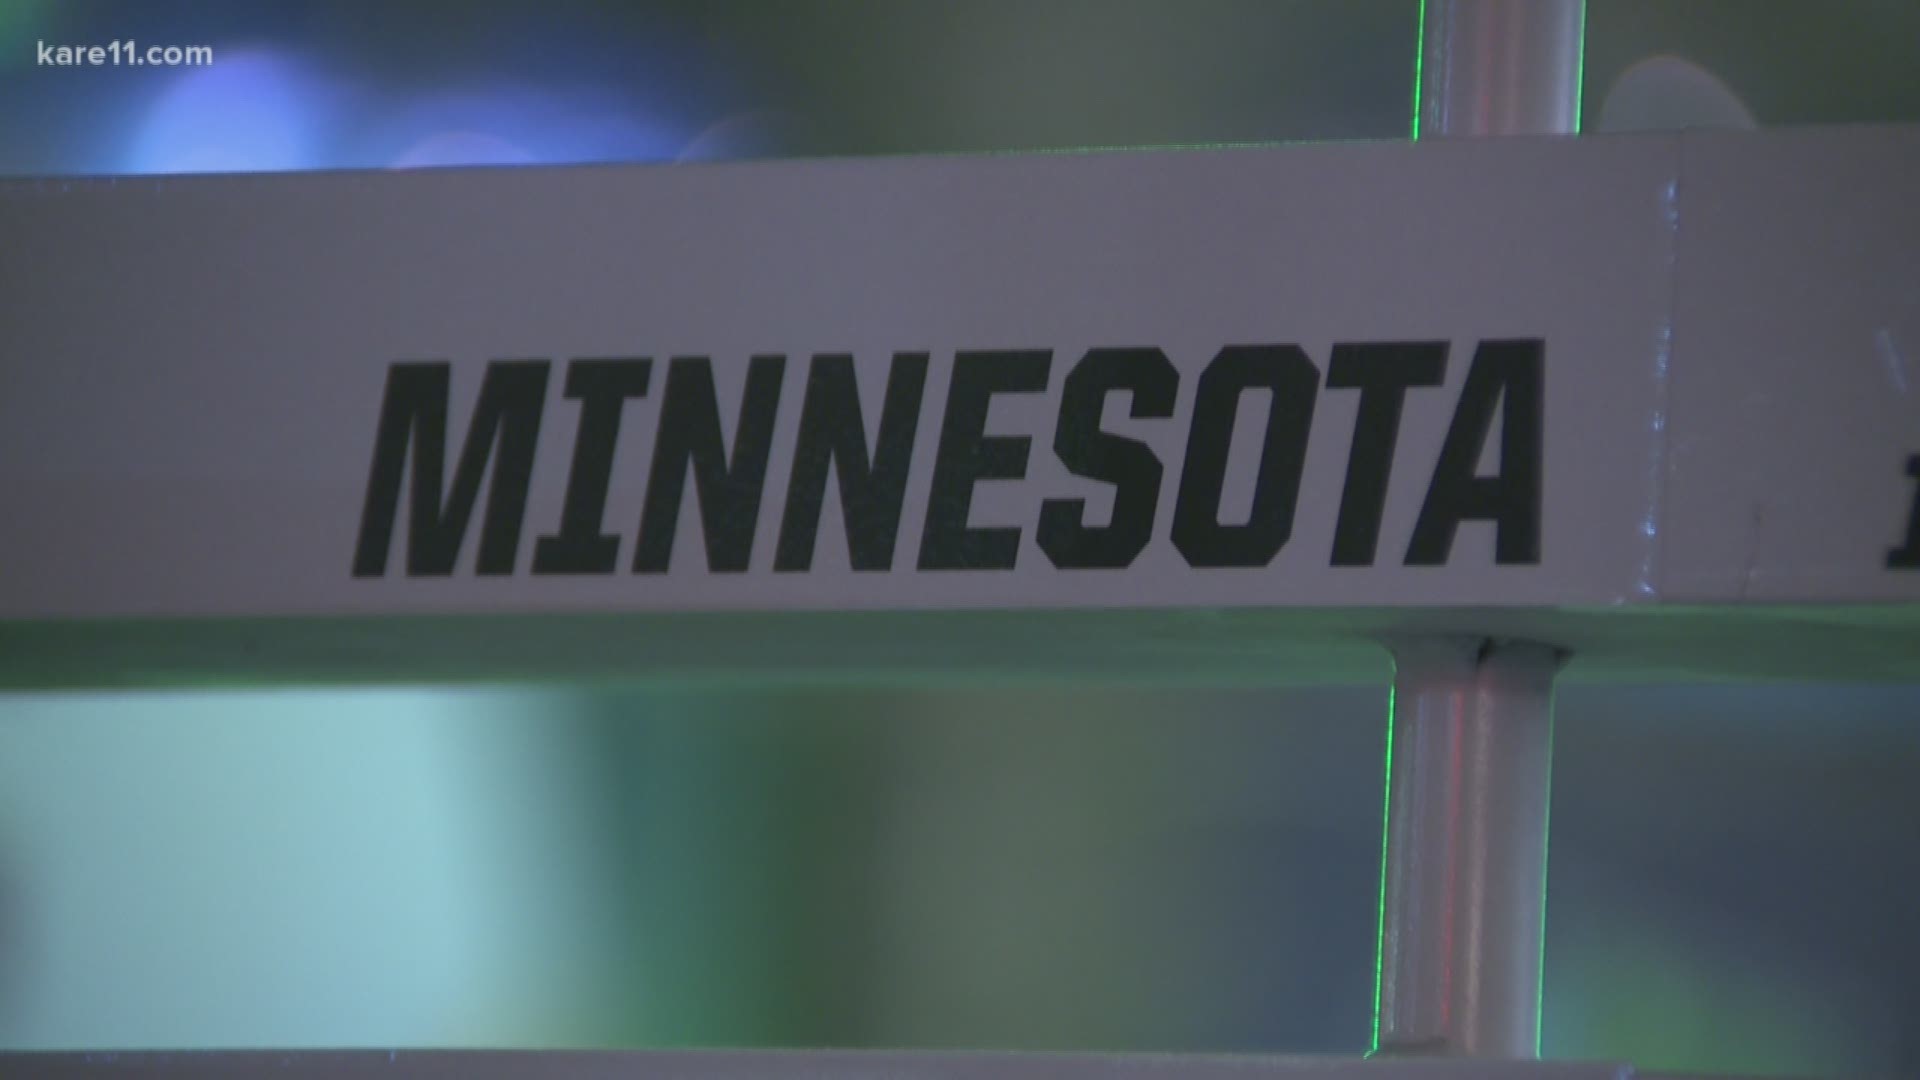 The Gophers will play a first-round NCAA Tournament game in Des Moines on Thursday, just 246 miles from campus.